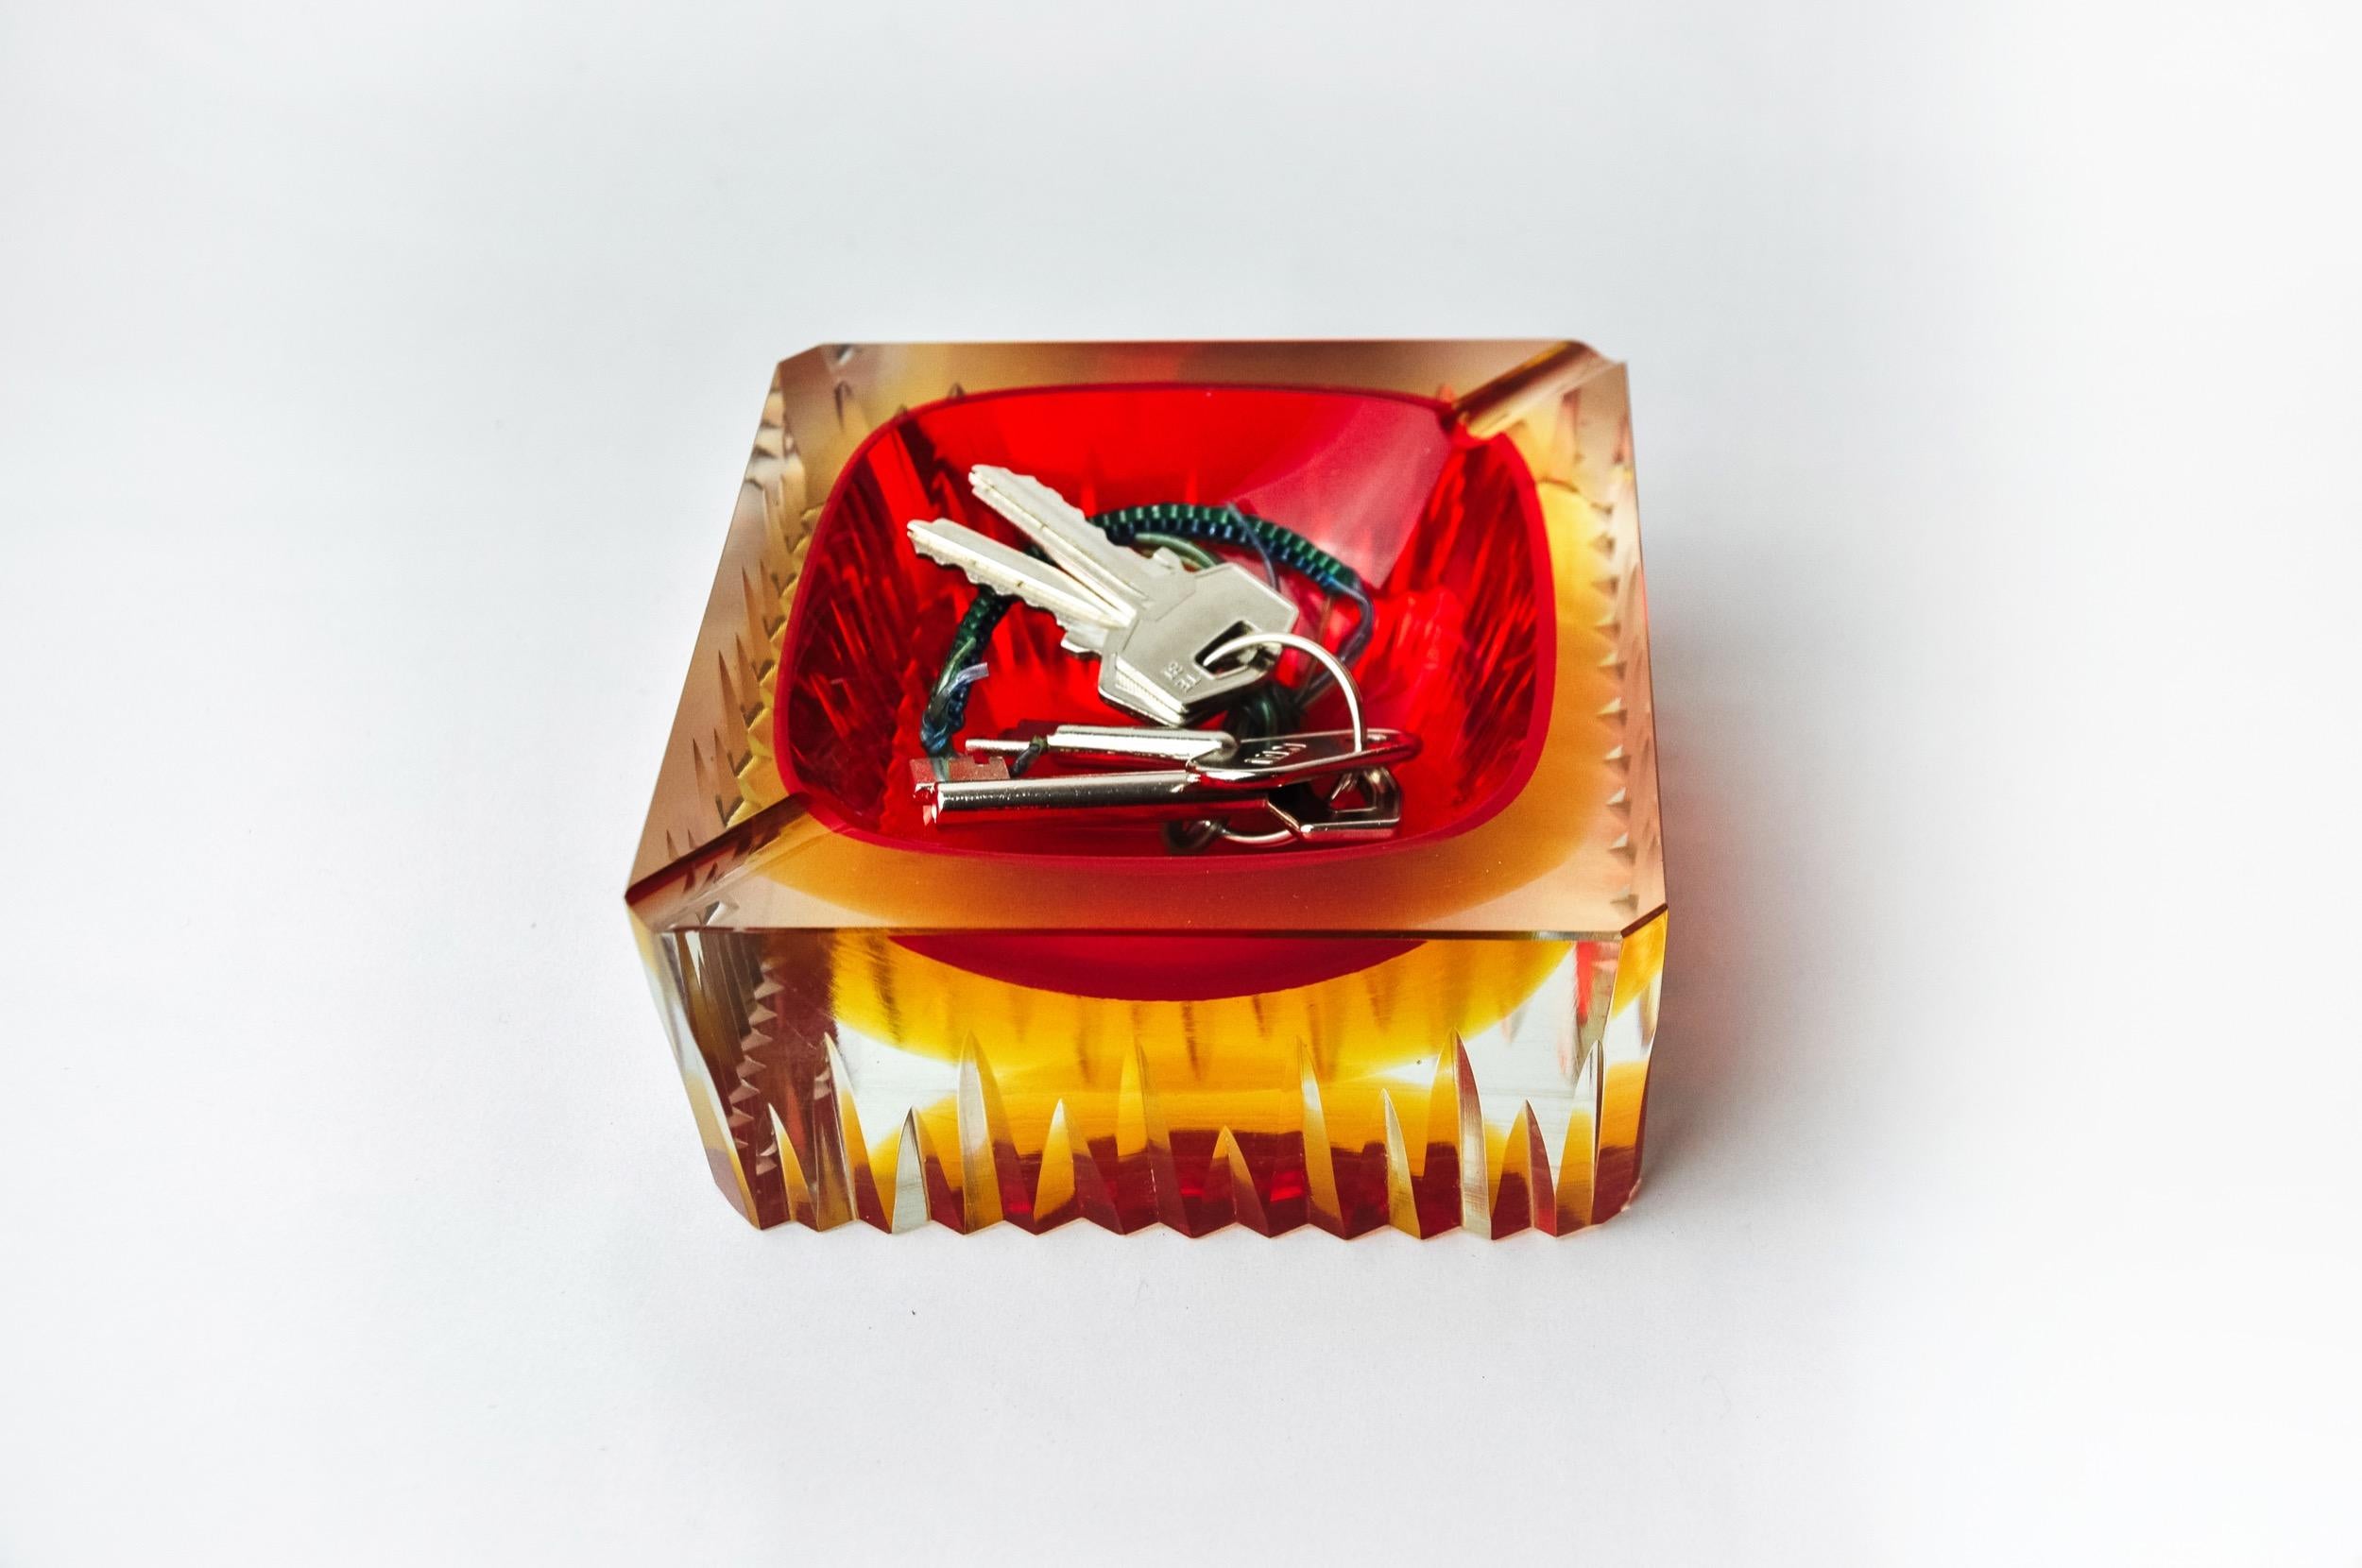 Superb and rare red and yellow cubic Sommerso ashtray designed and manufactured for Seguso in Murano in the 1970s. Handcrafted work of faceted glass using the 